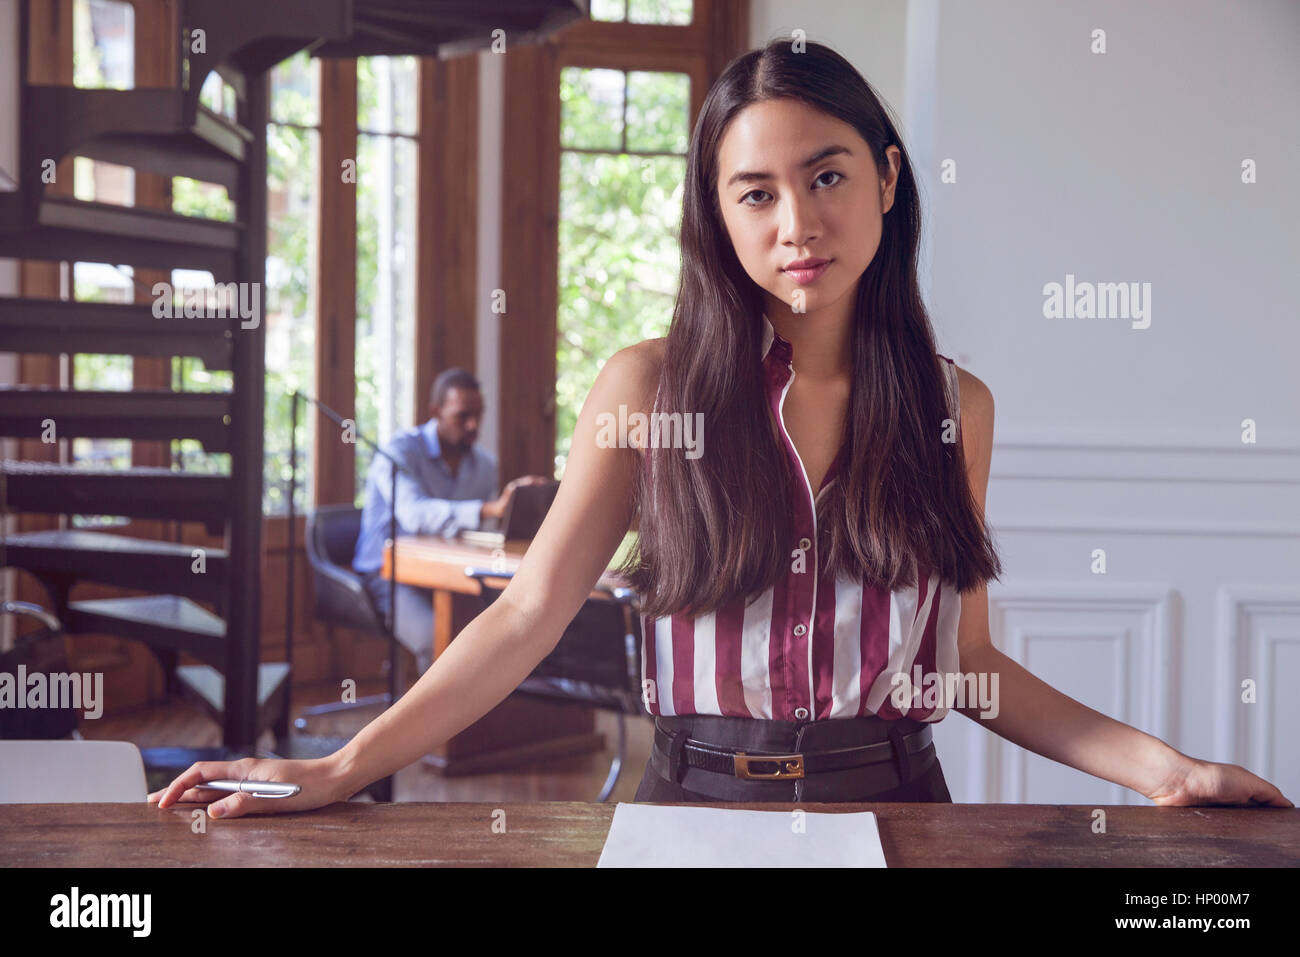 Young woman in office, portrait Stock Photo